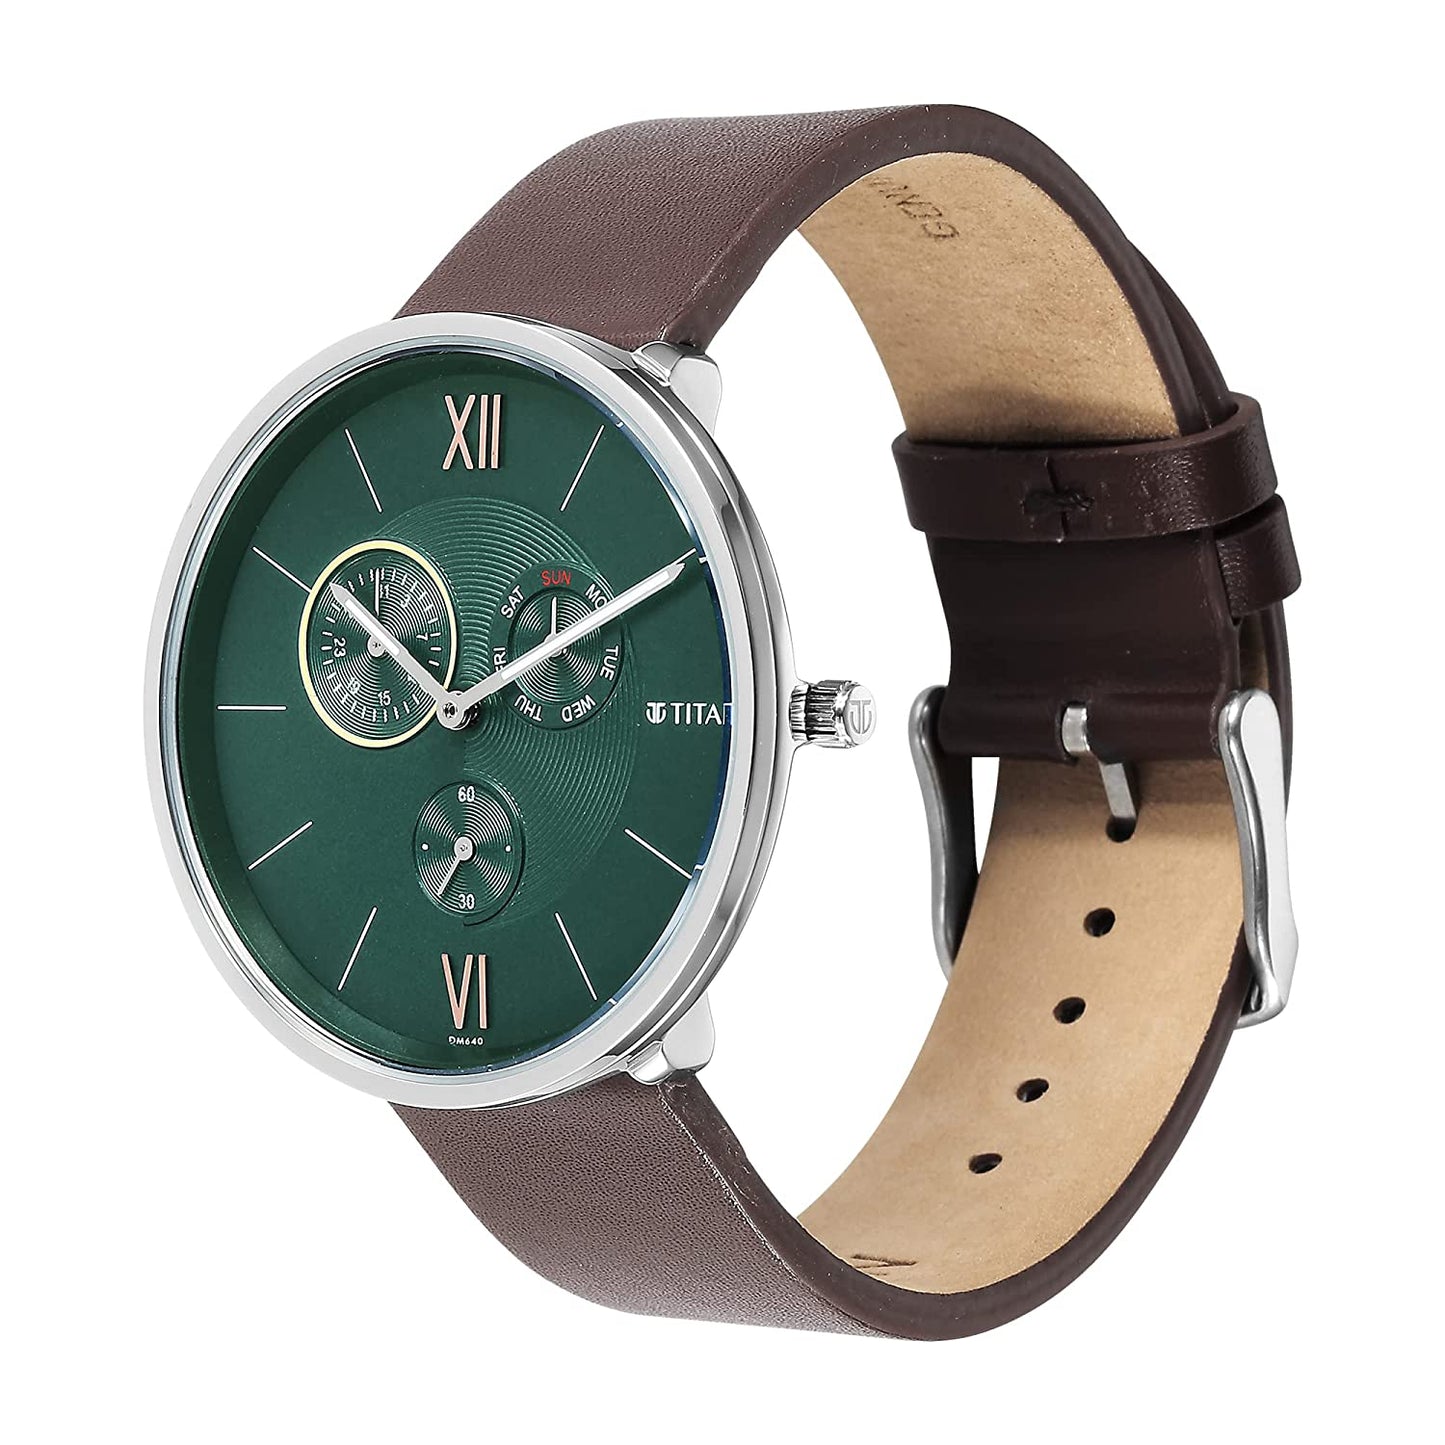 Maritime Watch with Anthracite Dial & Leather Strap 1877SL01